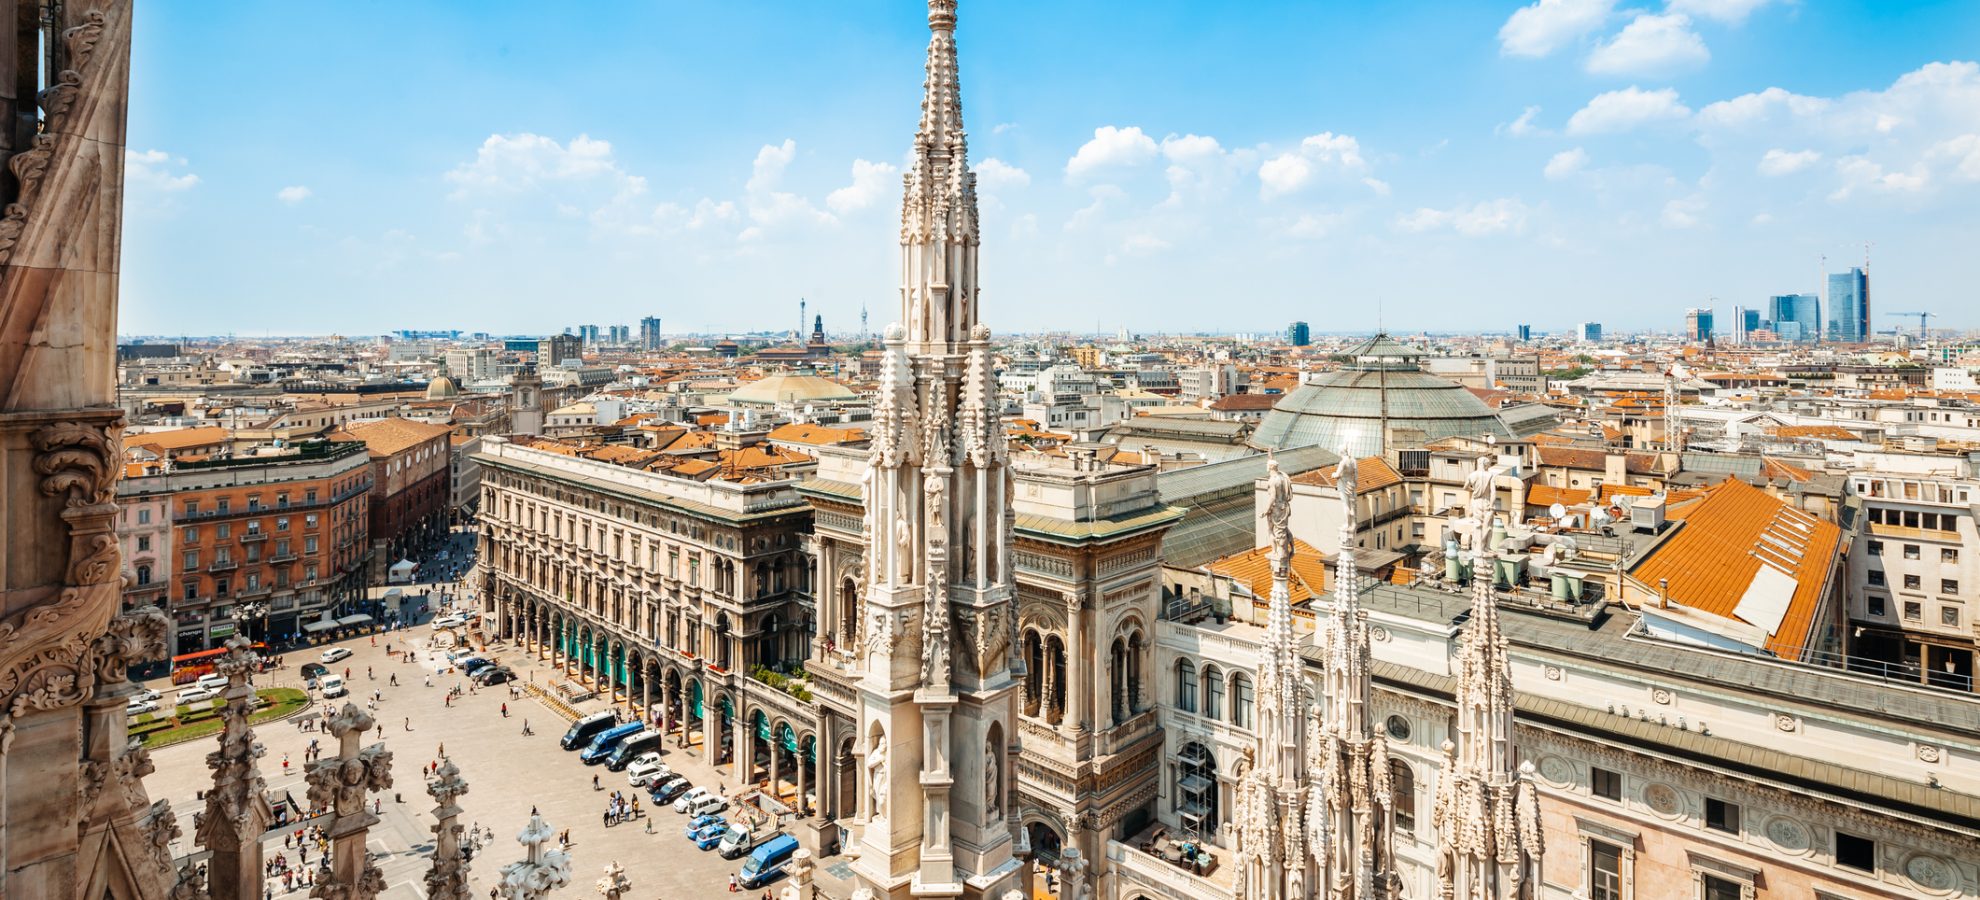 Aerial view of the Piazza del Duomo with Galleria Vittorio Emanuele II in Milan, Italy